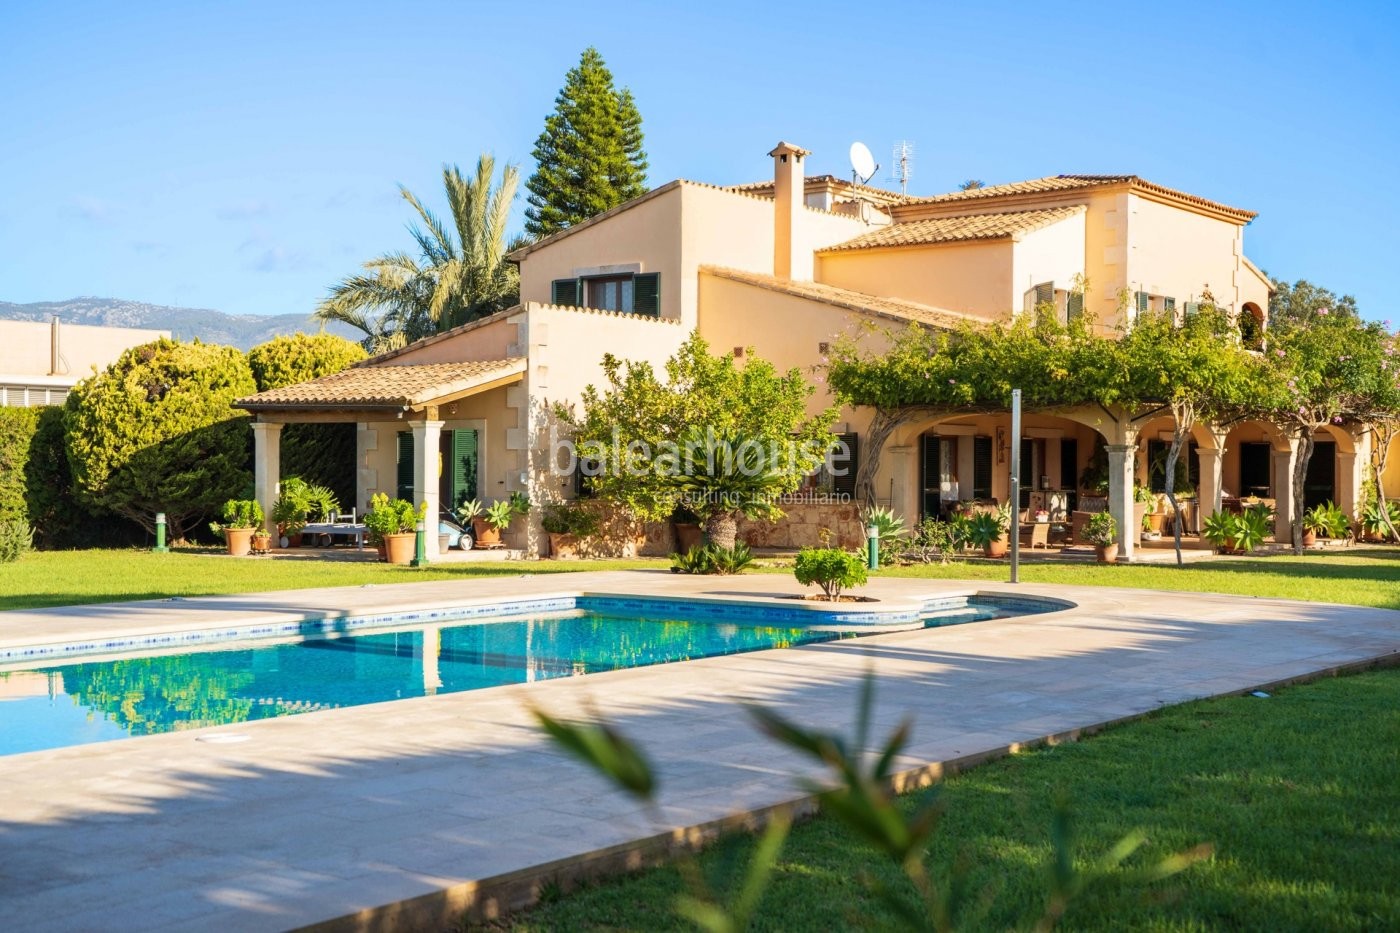 Spacious house with a large private garden and pool in tranquil residential area.